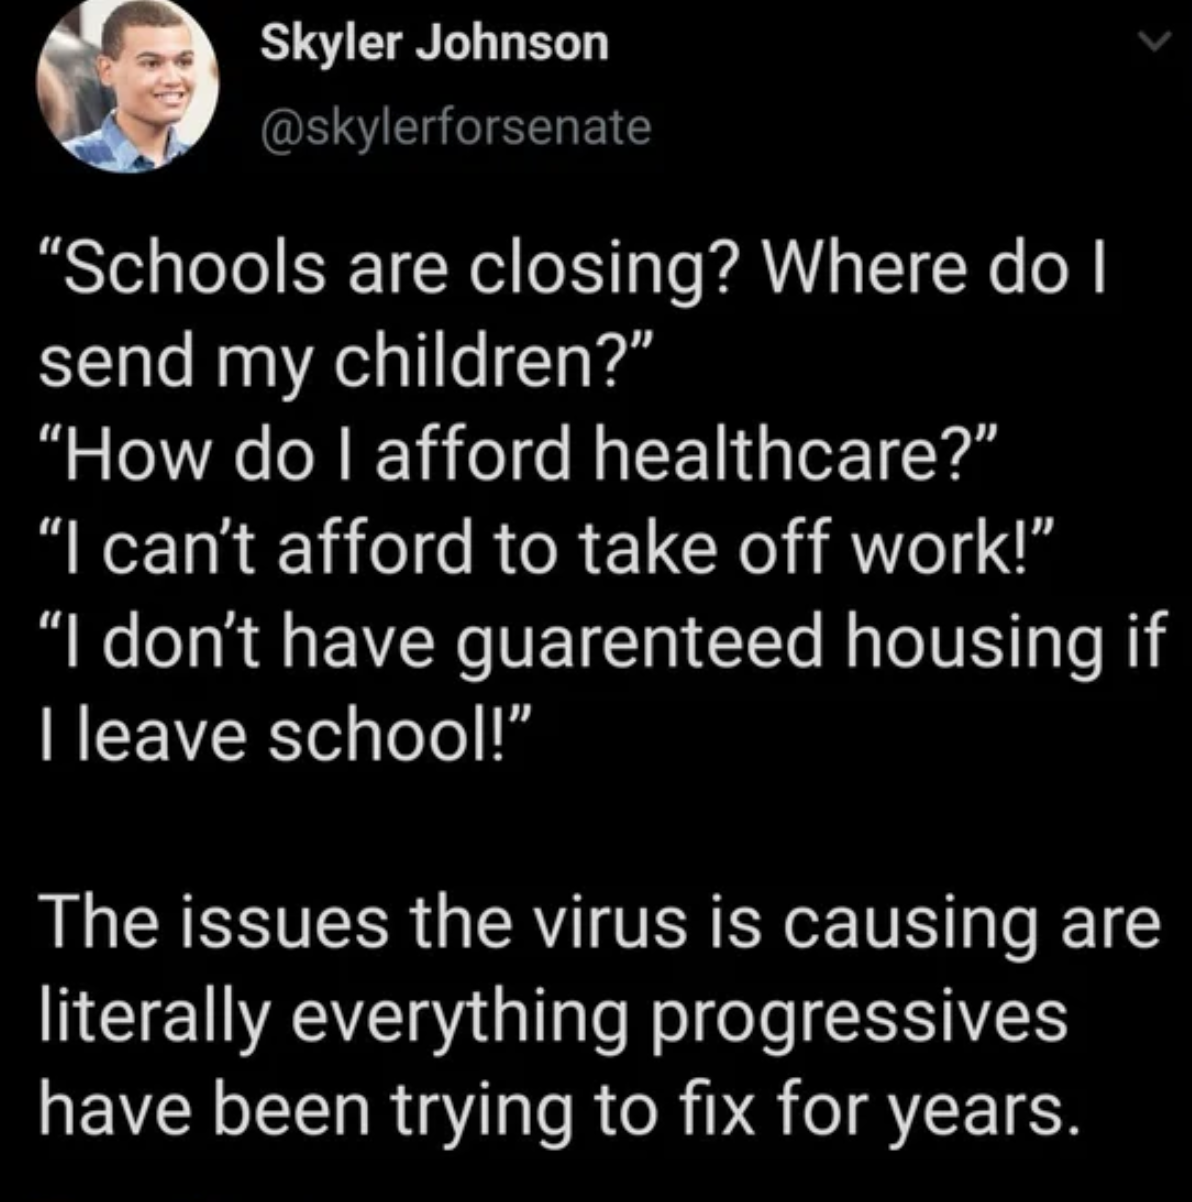 lyrics - Skyler Johnson "Schools are closing? Where do I send my children?" "How do I afford healthcare?" "I can't afford to take off work!". I don't have guarenteed housing if Ileave school!" The issues the virus is causing are literally everything progr